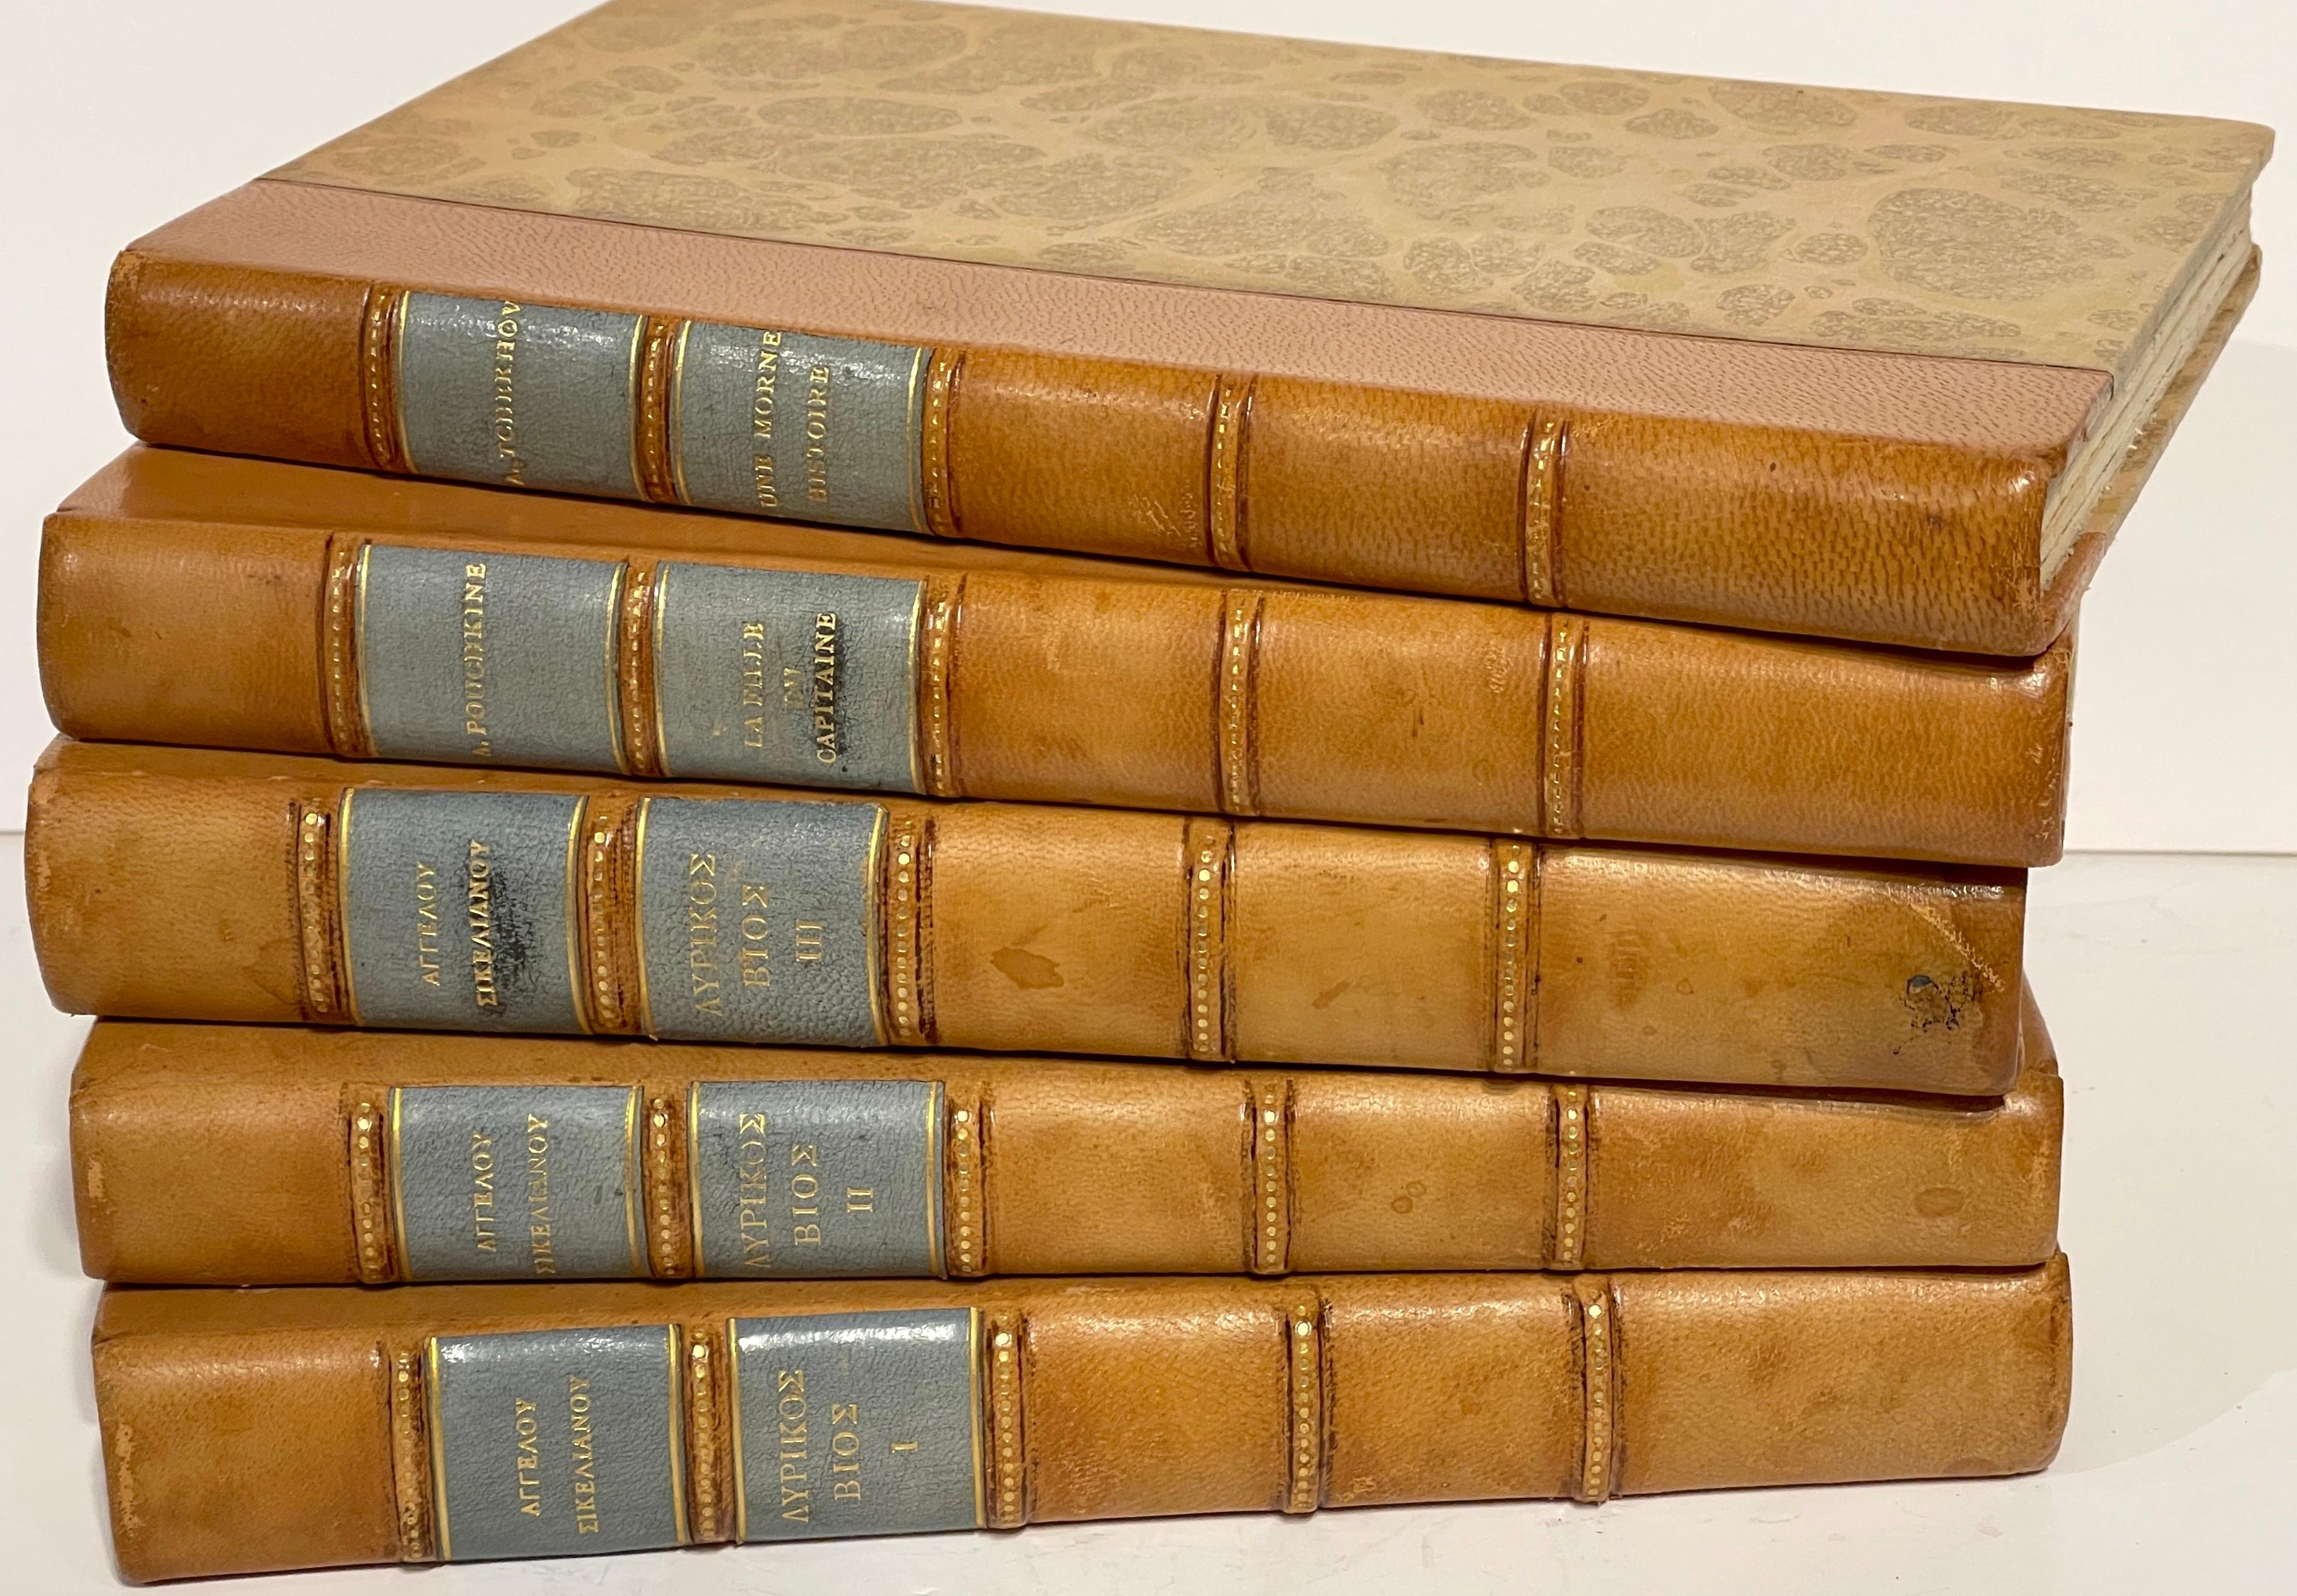 5 Antique Saddle Leather and Gilt Steel Grey Bound Gilt Theatrical Books in Greek
European and early 20th-century authors, including Anton Chekhov, et al.

Five enchanting Antique Saddle Leather and Gilt Steel Grey Bound Theatrical Books in Greek,